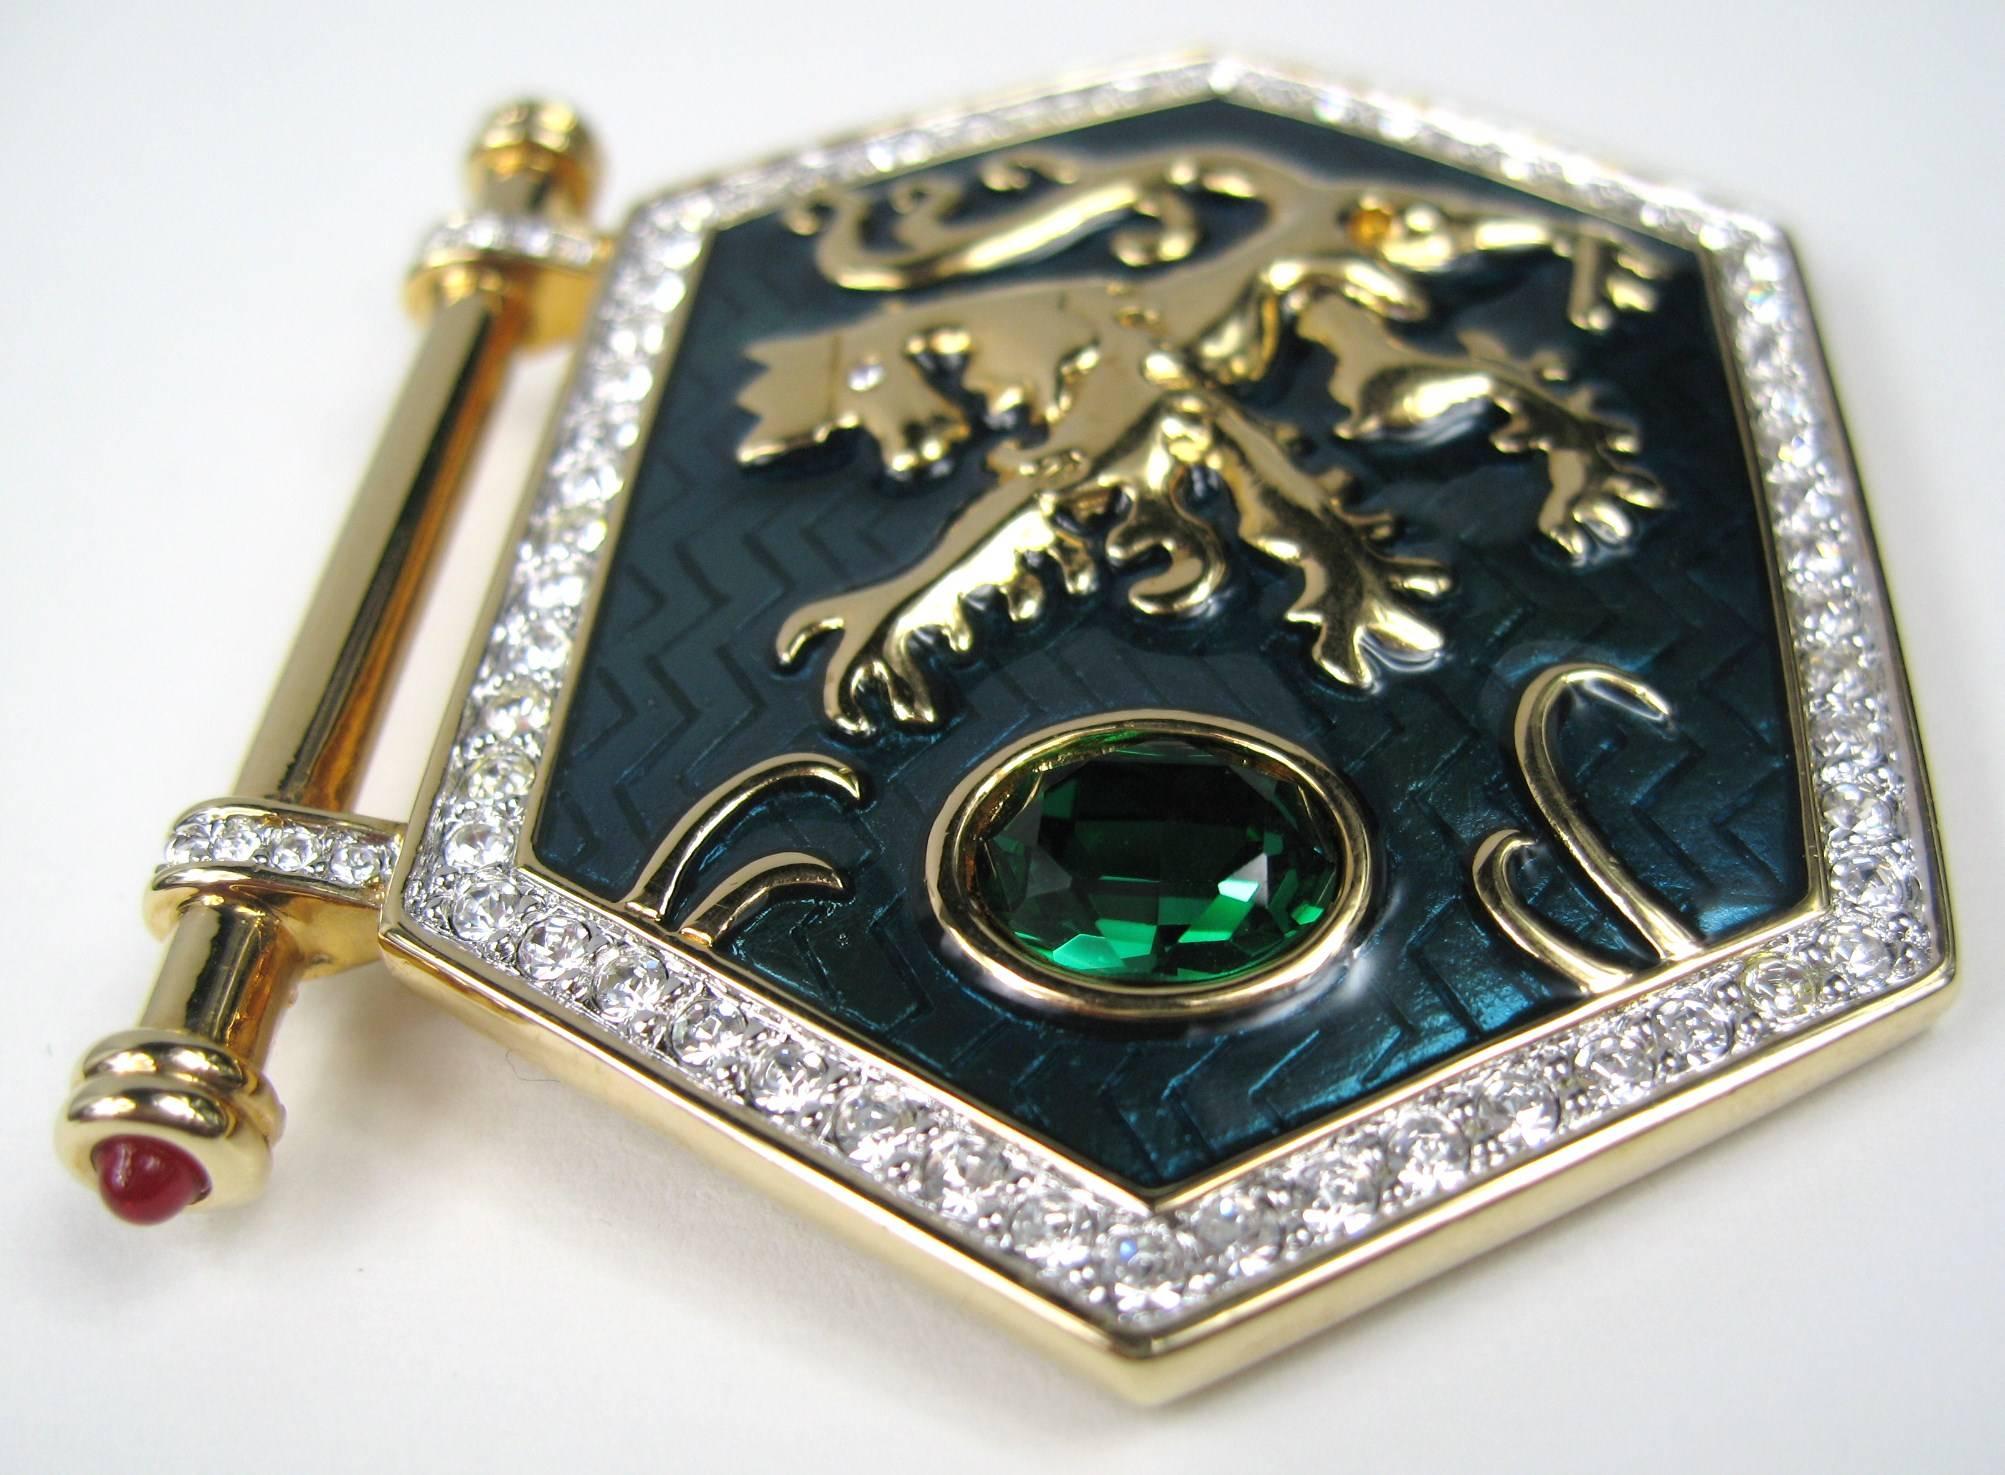 Swarovski Brooch Gold Griffin set over green enamel with a large green Swarovski Crystal then surrounded by clear crystals. It has a bar across with red cabochons set on both ends Measures 2.38 in o 60.64mm wide x 2.06 in or 52.54mm top to bottom.